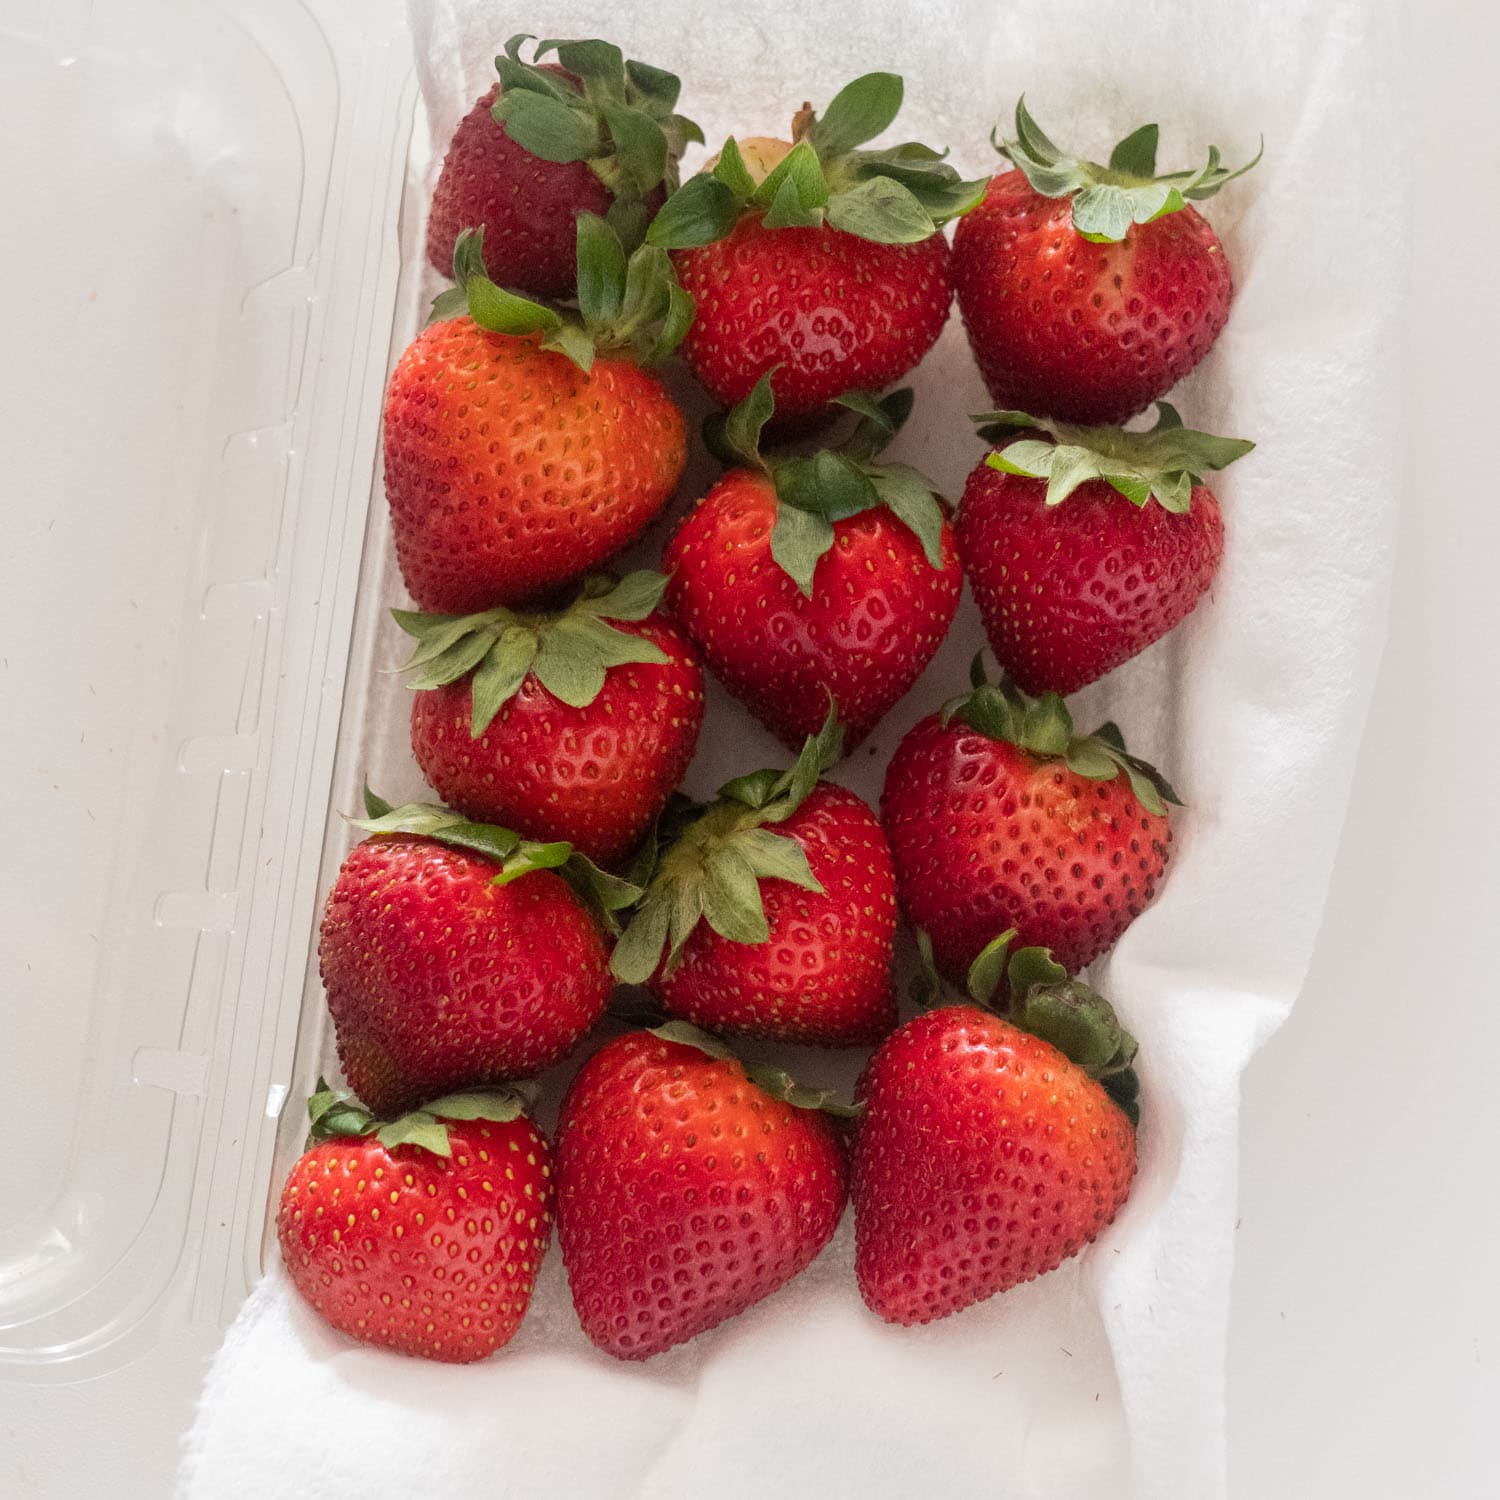 https://brooklynfarmgirl.com/wp-content/uploads/2020/07/How-to-Store-and-Freeze-Strawberries-Featured-Image.jpg